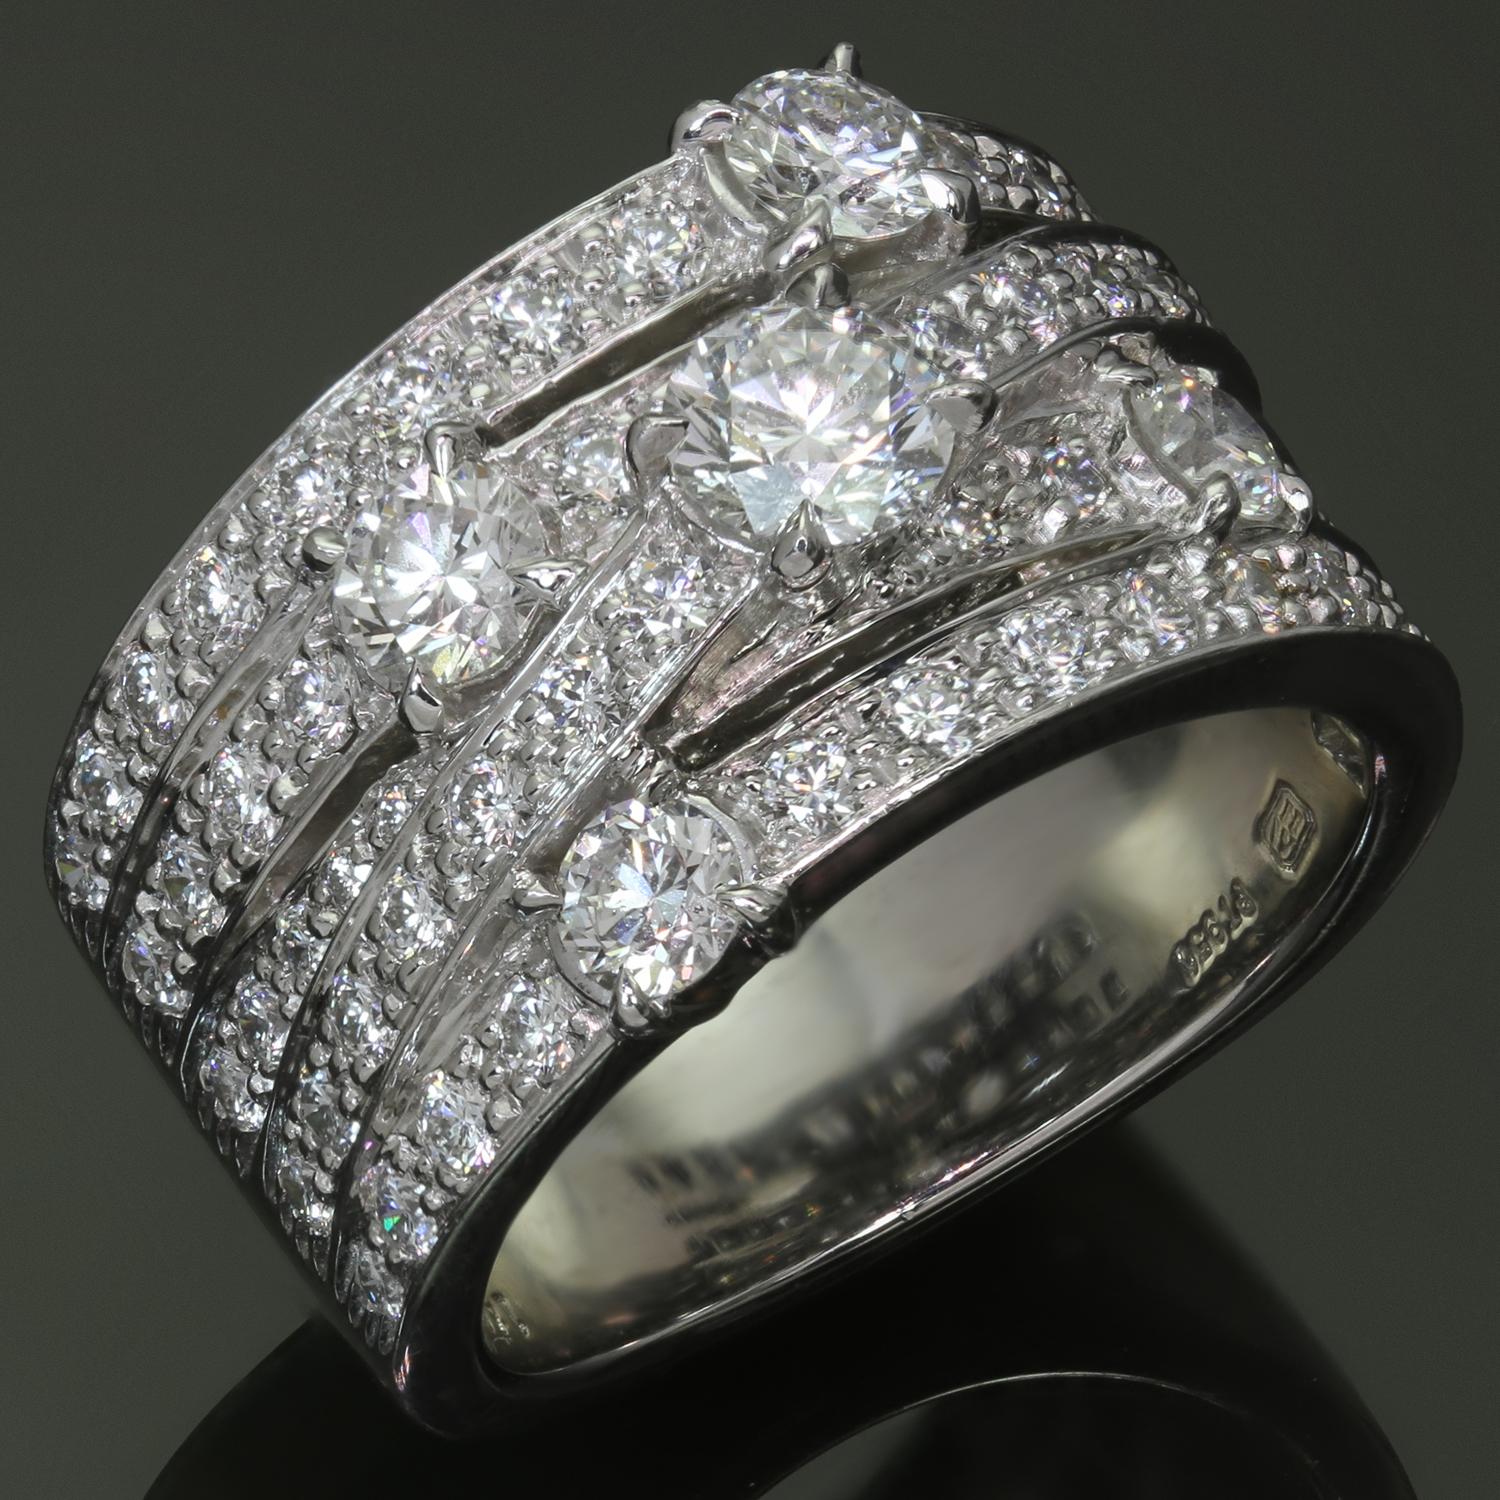 This stunning Harry Winston ring features a crossover design is crafted in 950 platinum and features 5 overlapping rows of round brilliant-cut diamonds - a total of 57 diamonds weighing an estimated 2.16 carats. Made in United States circa 2009.